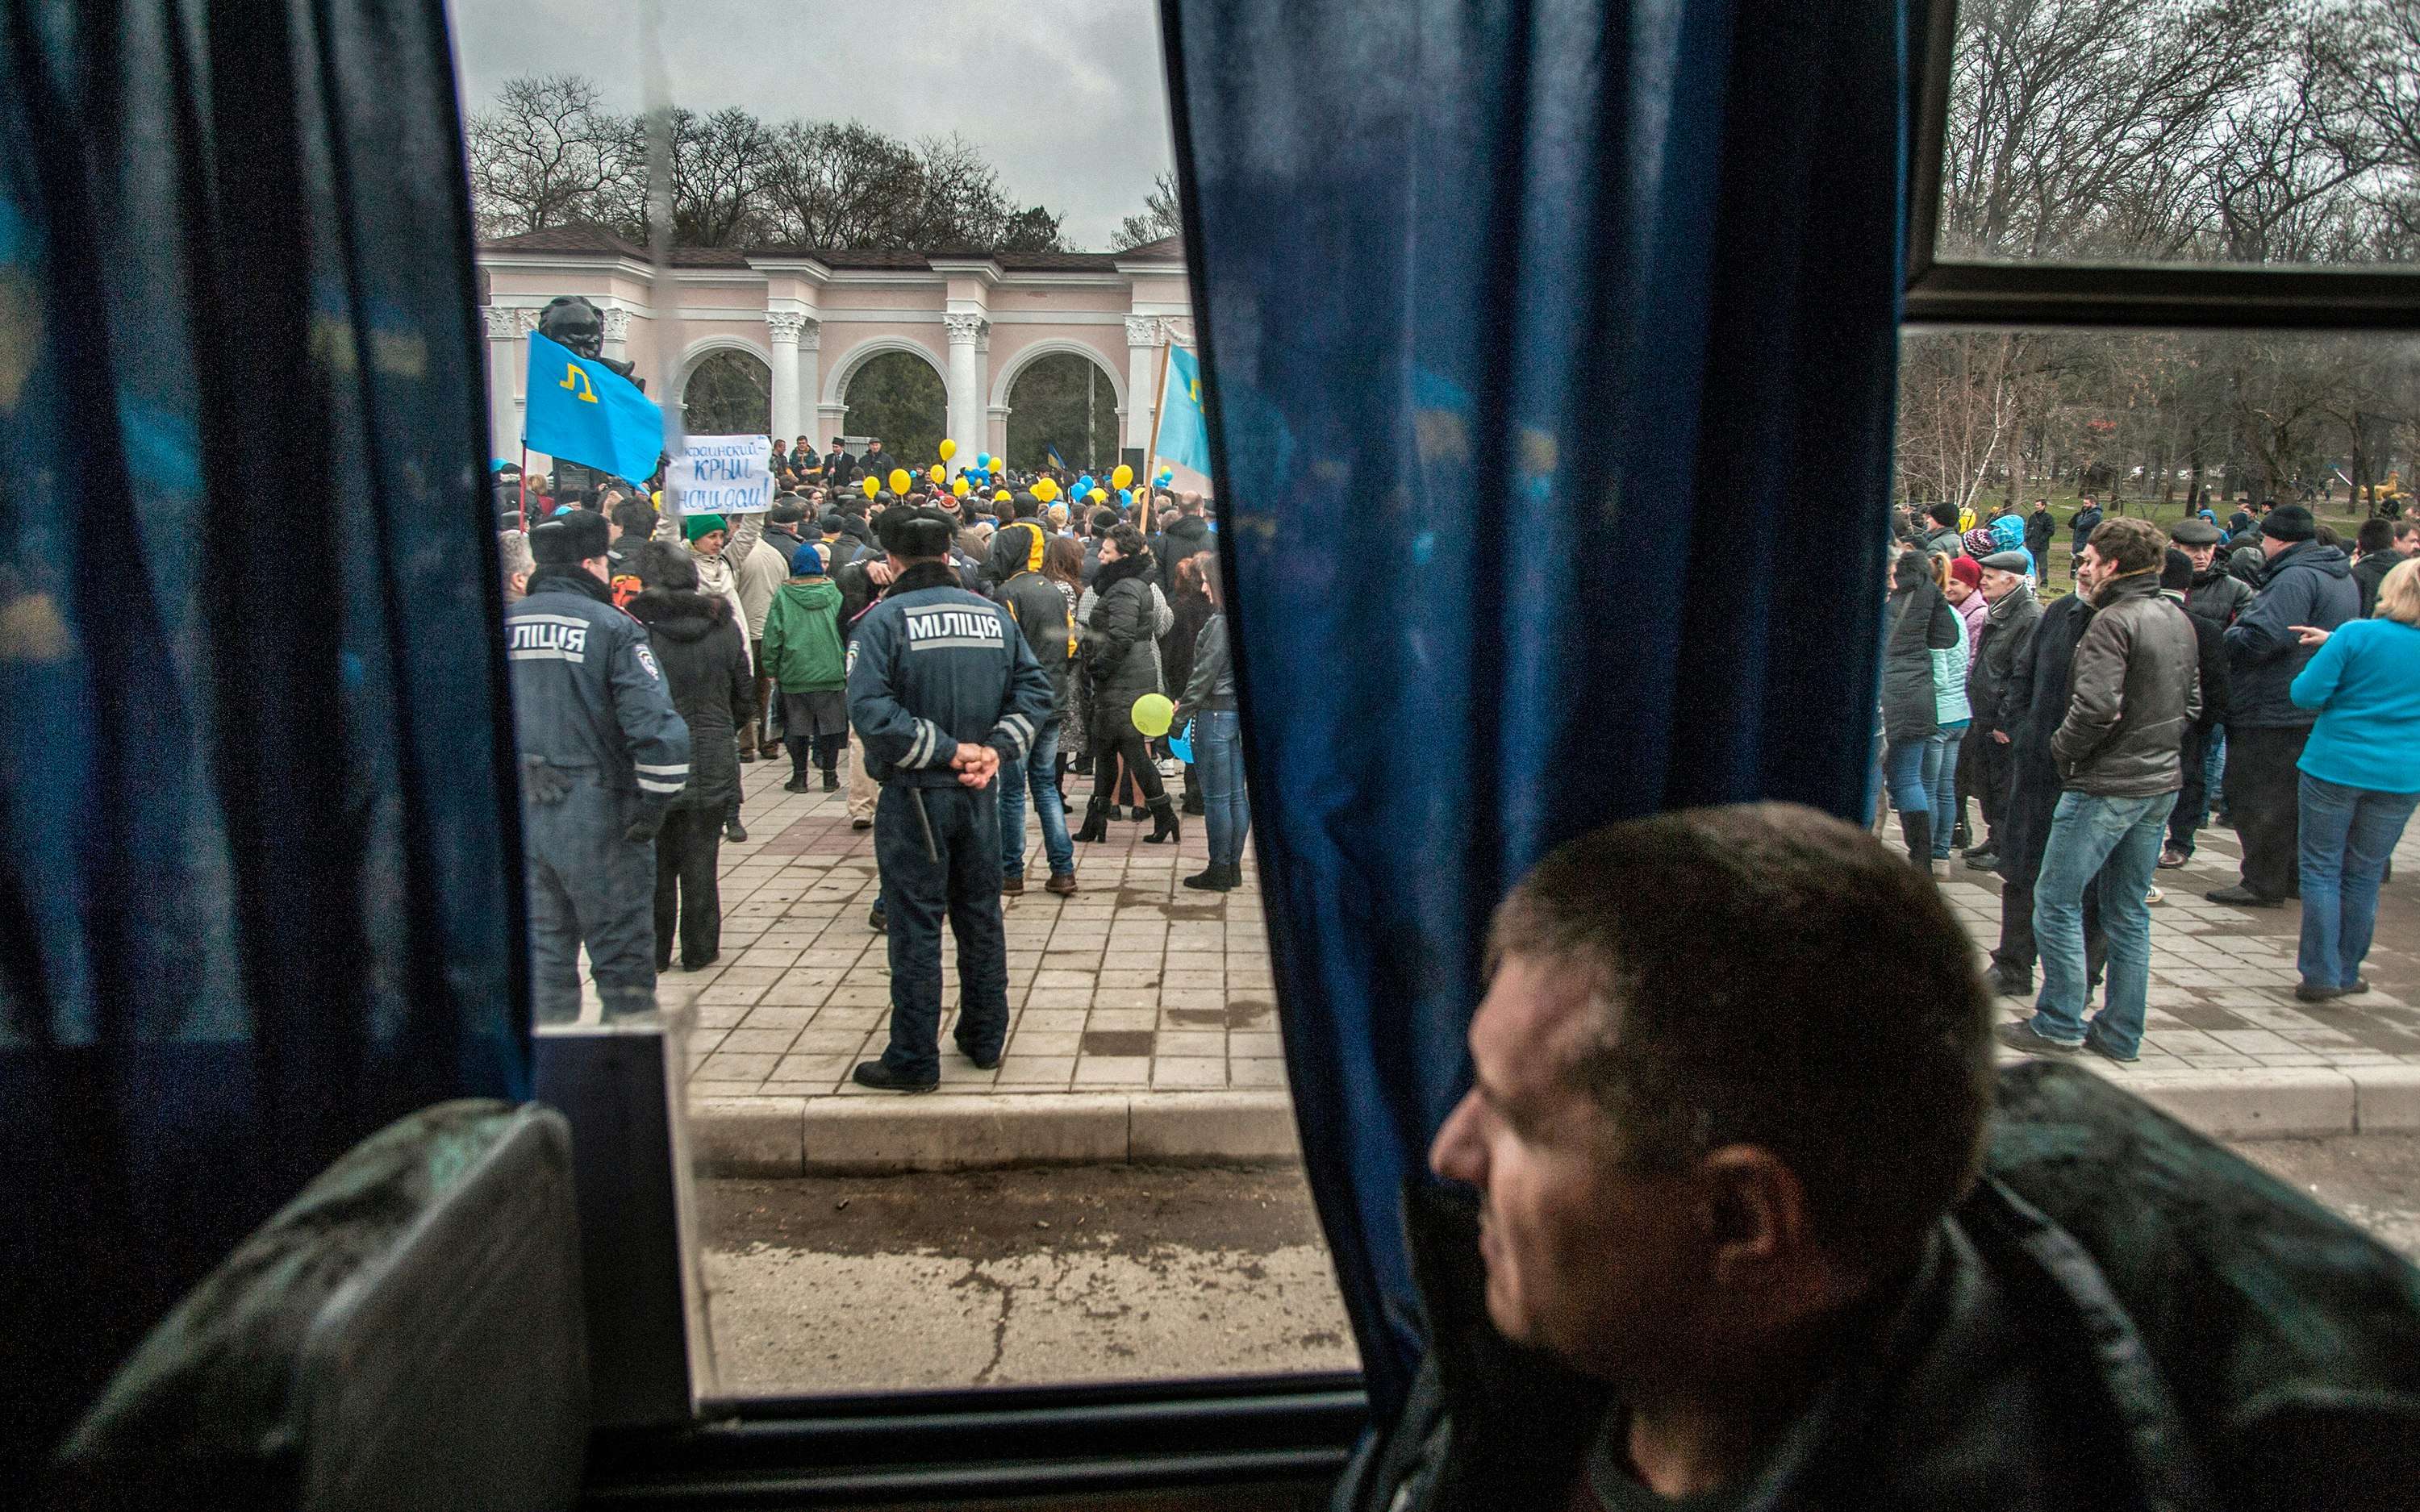 A man views a crowd of protesters from inside a bus